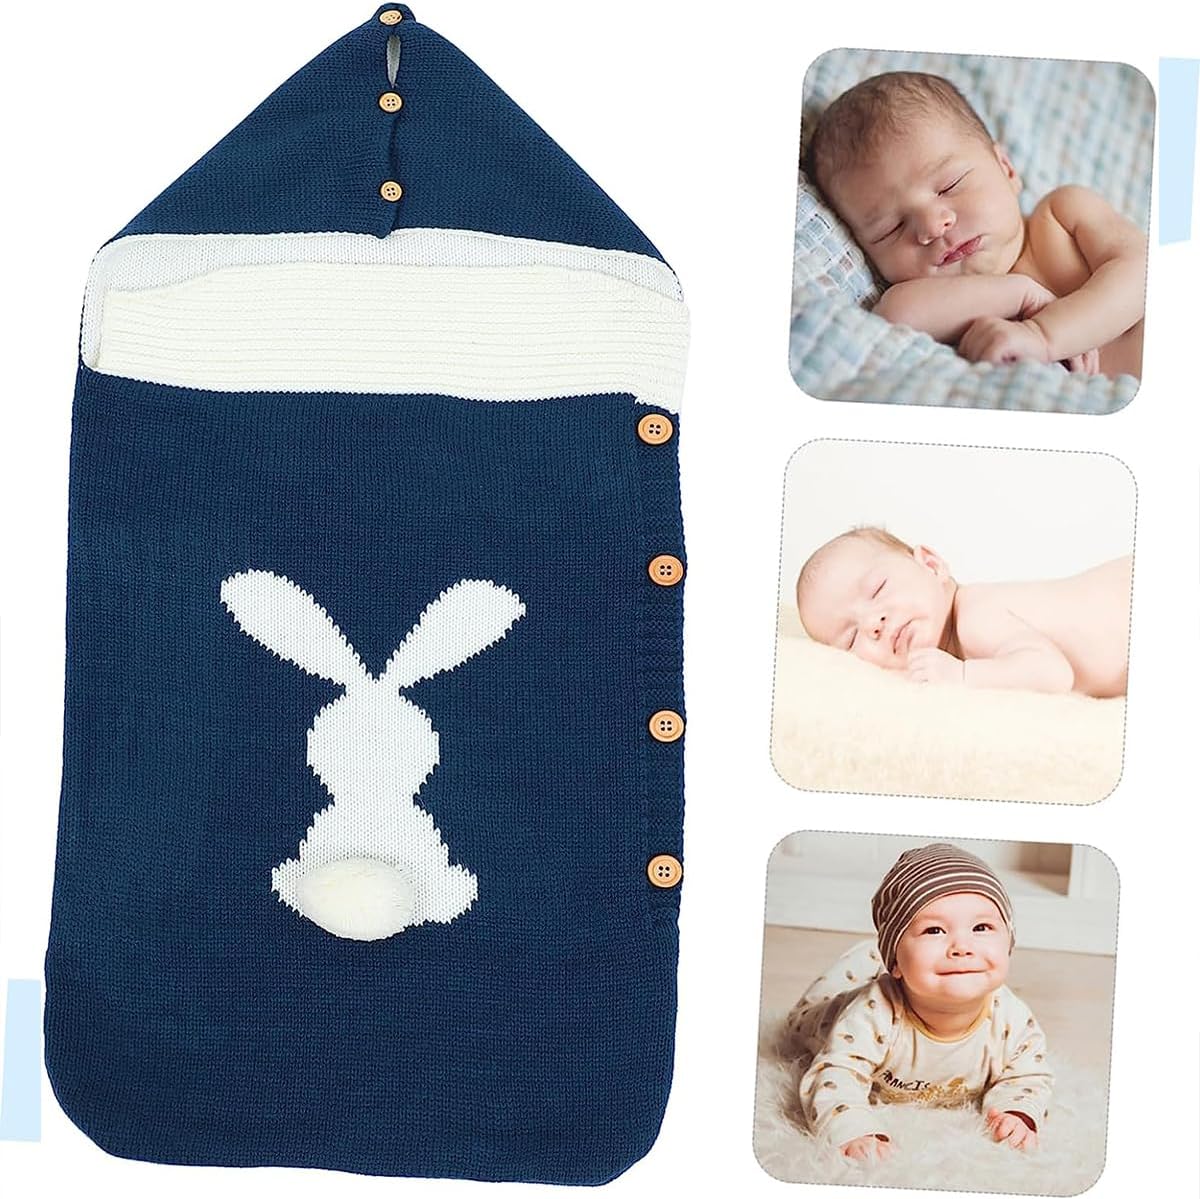 LinJie Baby Swaddle Wrap,Baby Knitting Sleeping Bag,Baby Swaddle Blanket，Stroller Sleeping Bag Refer To 0-12 Months Girls Or Boys.